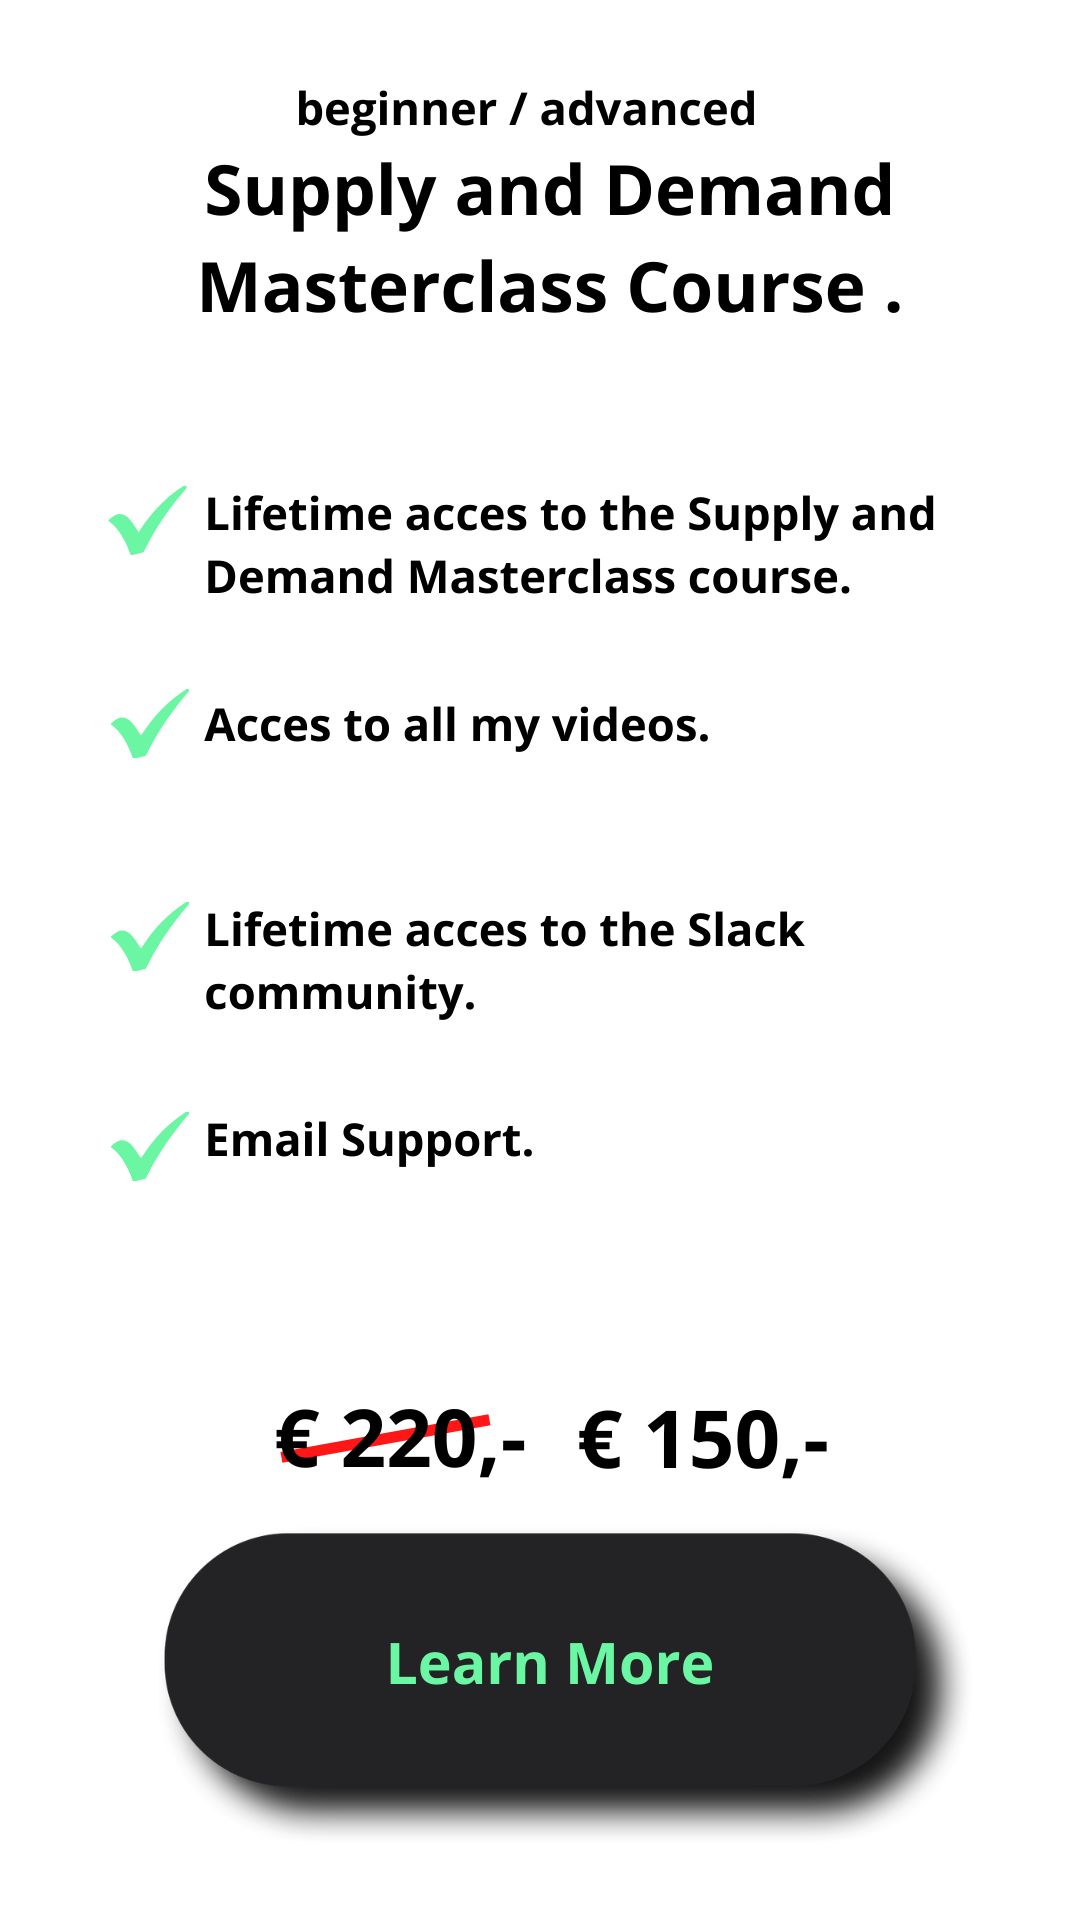 Supply and Demand Masterclass course